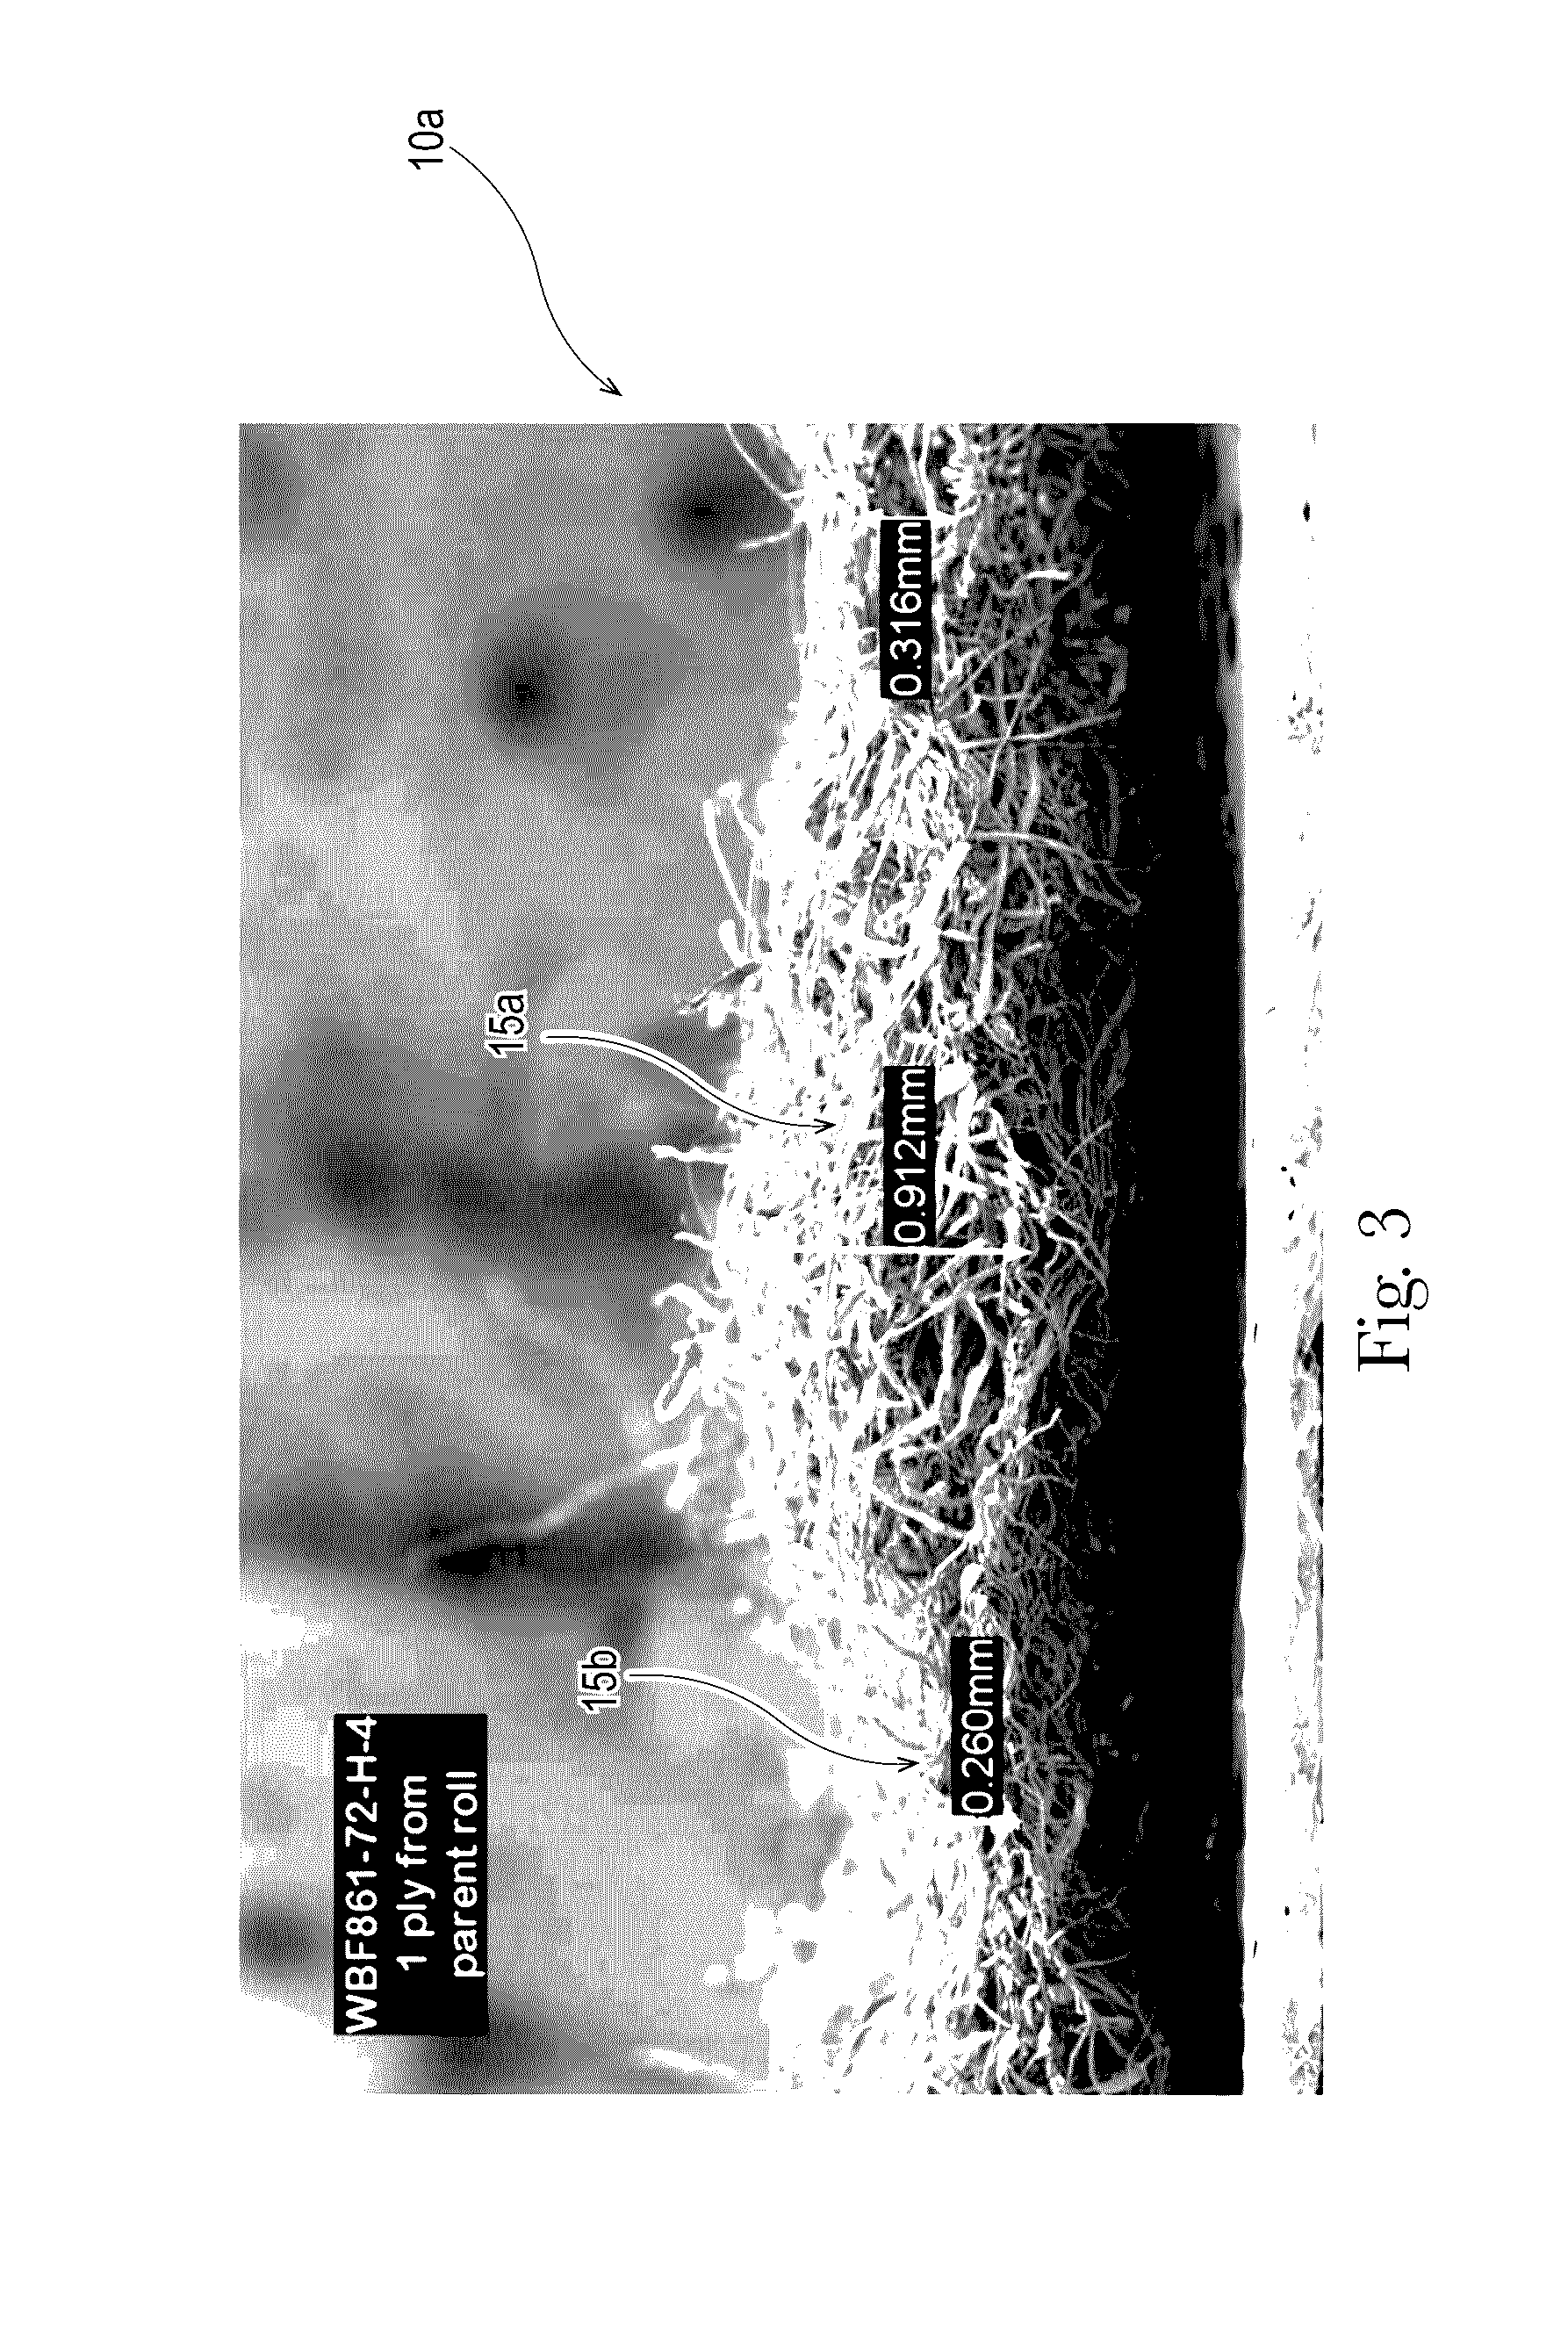 ENHANCEd CO-FORMED MELTBLOWN FIBROUS WEB STRUCTURE AND METHOD FOR MANUFACTURING